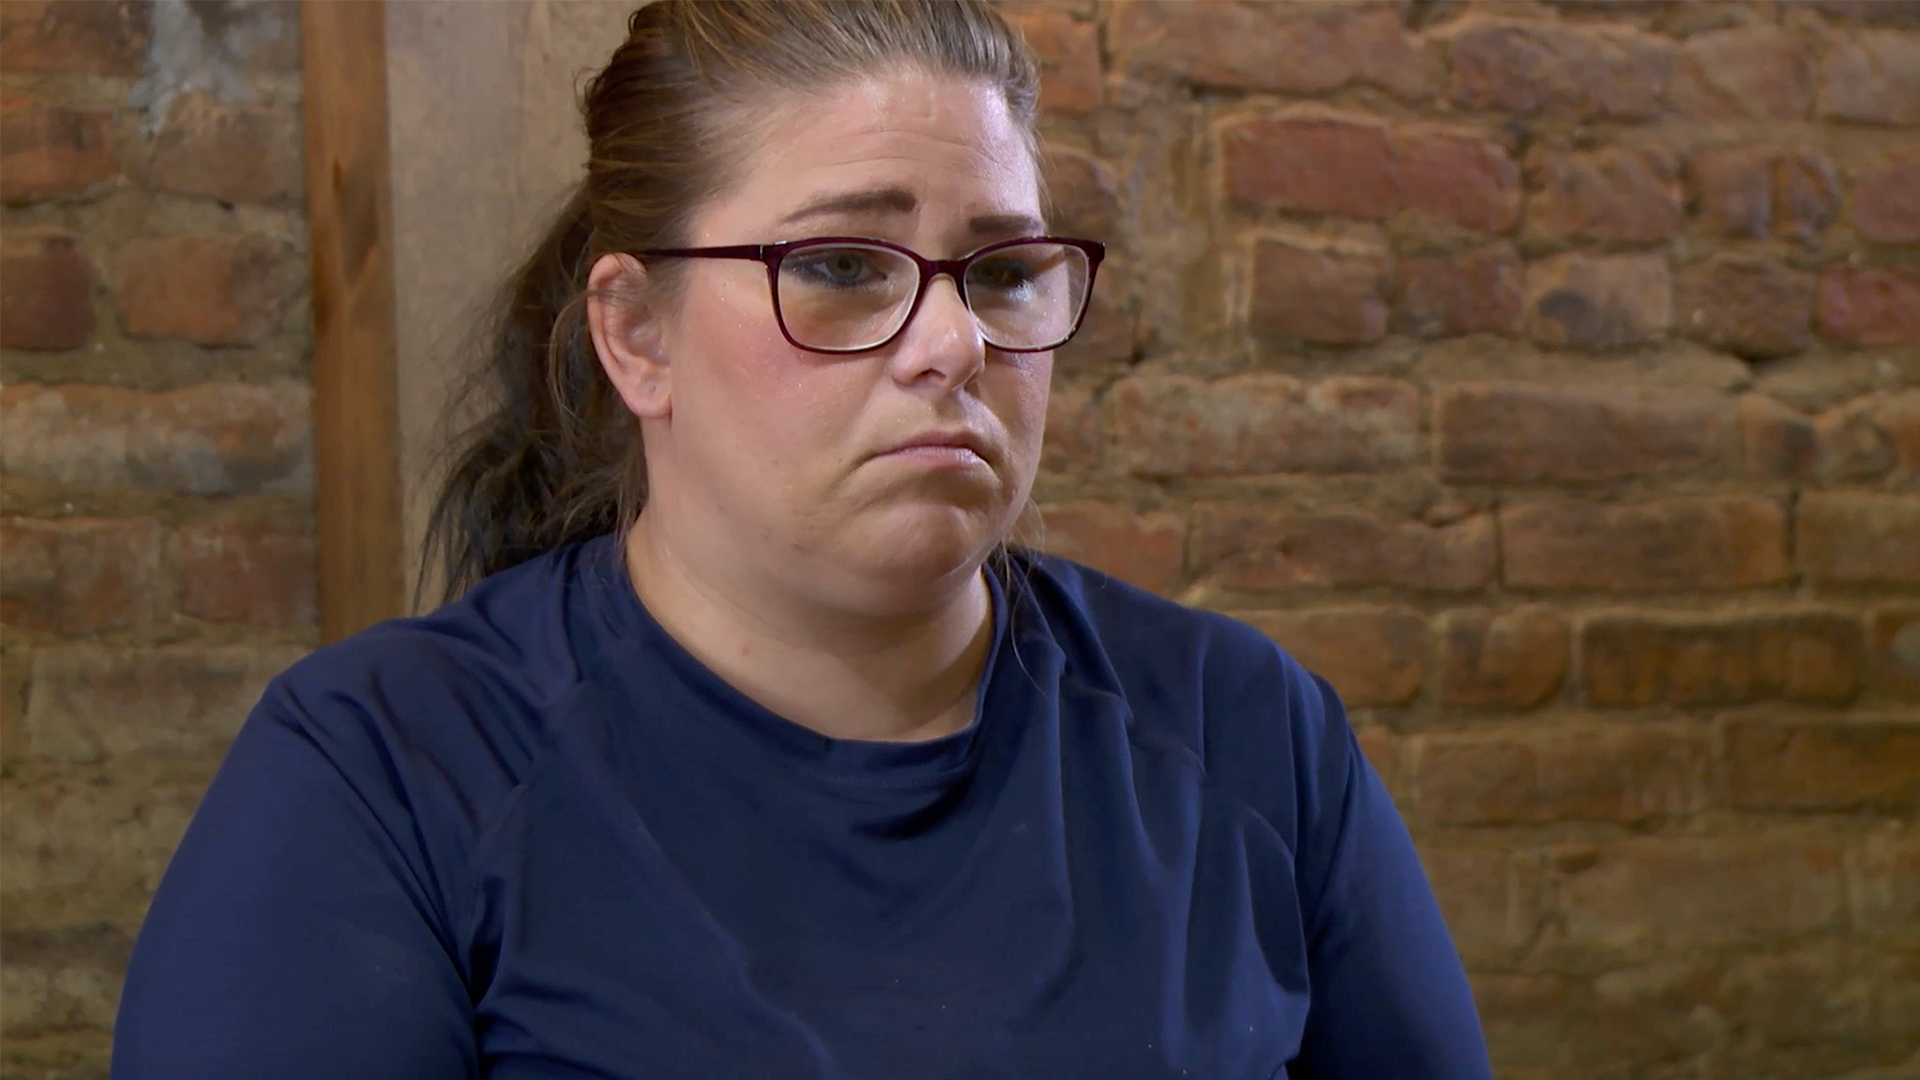 Watch Overheard: 'I Slept With Her Baby Daddy' | Life After Lockup Video Extras